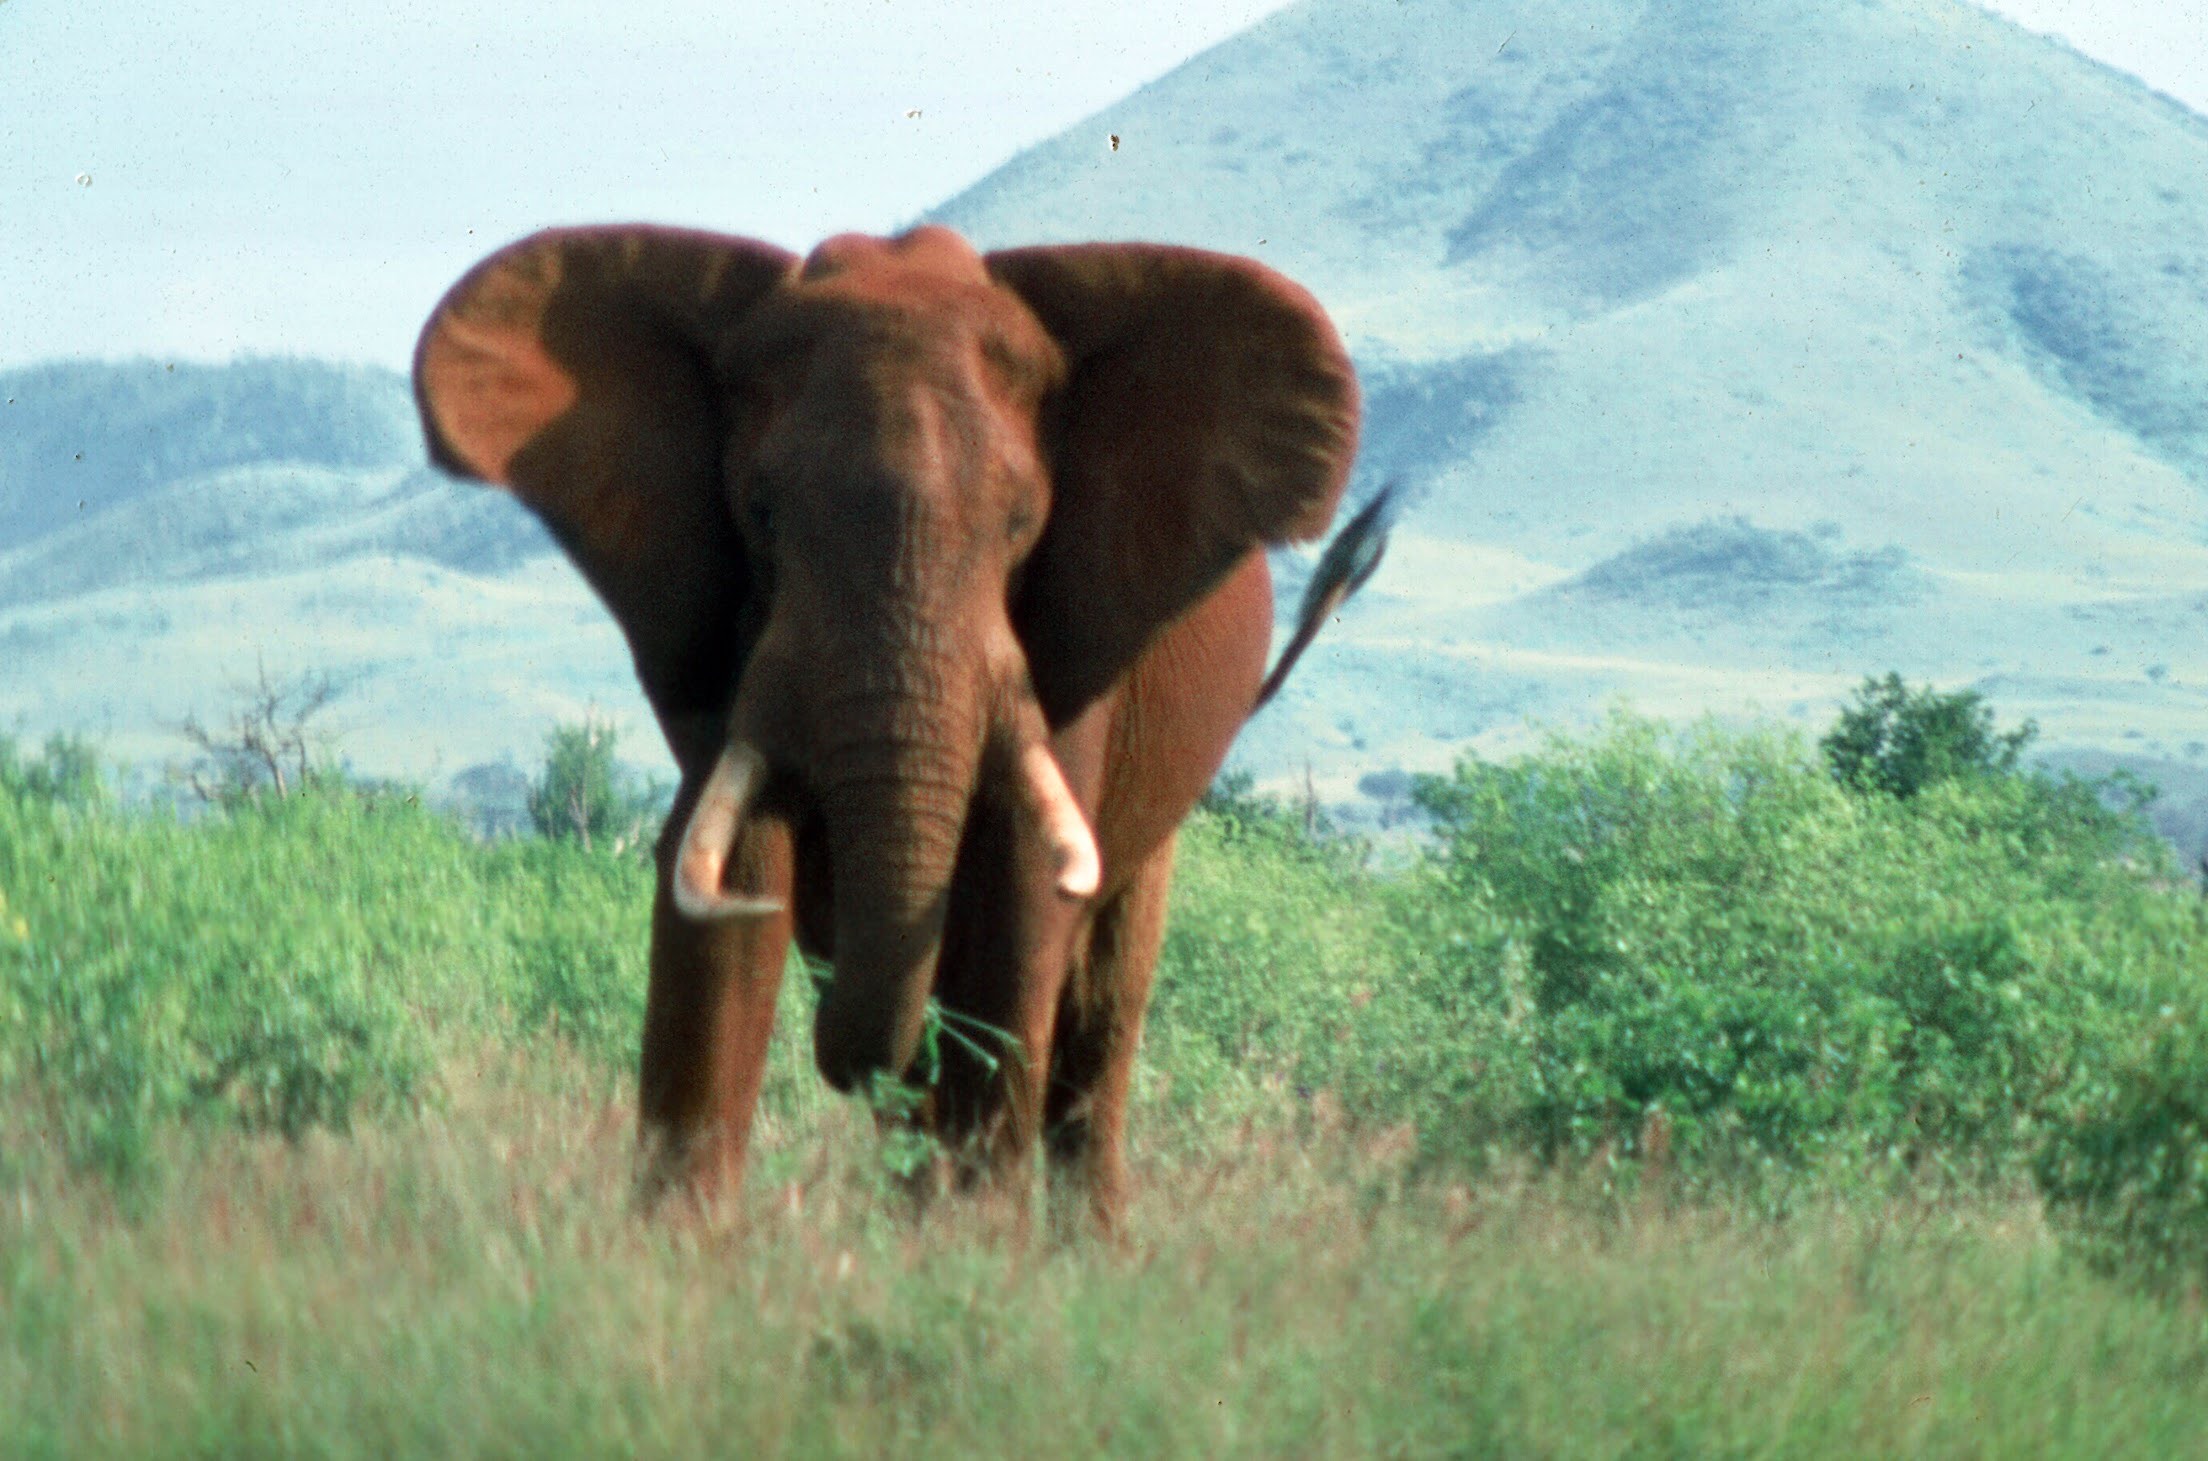 Photo of an elephant charging with a large hill in the background